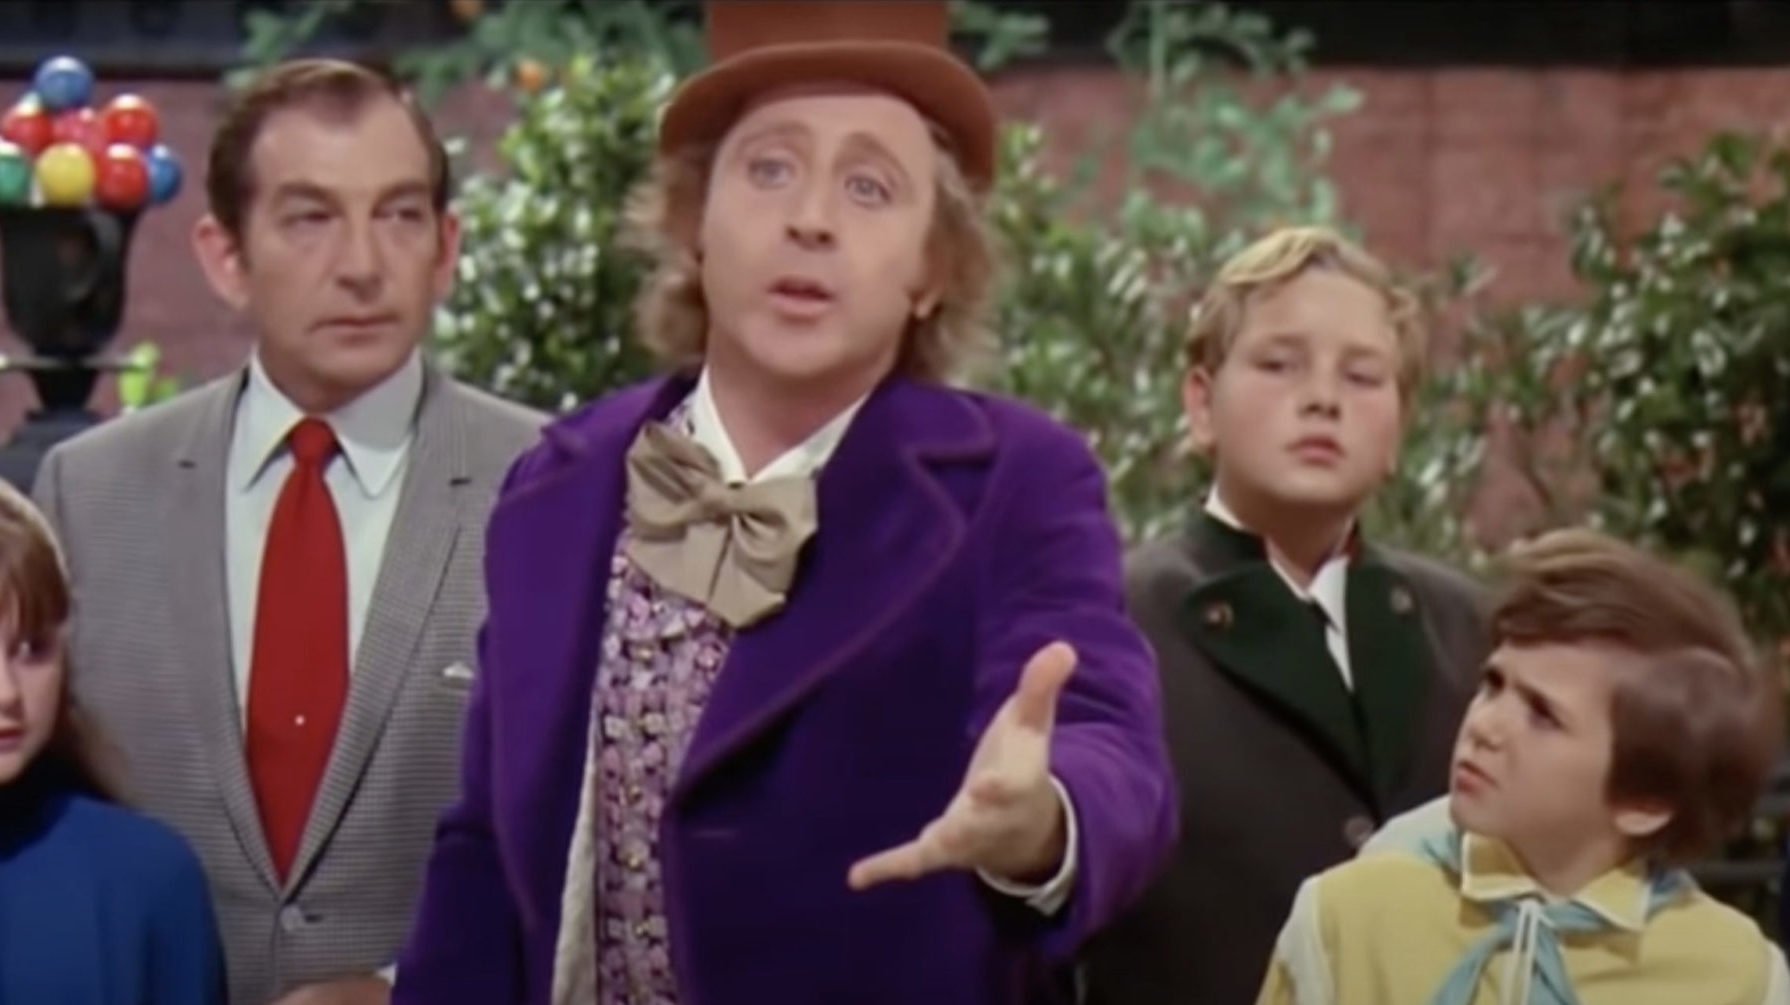 Postliberalism and a World of Pure Imagination